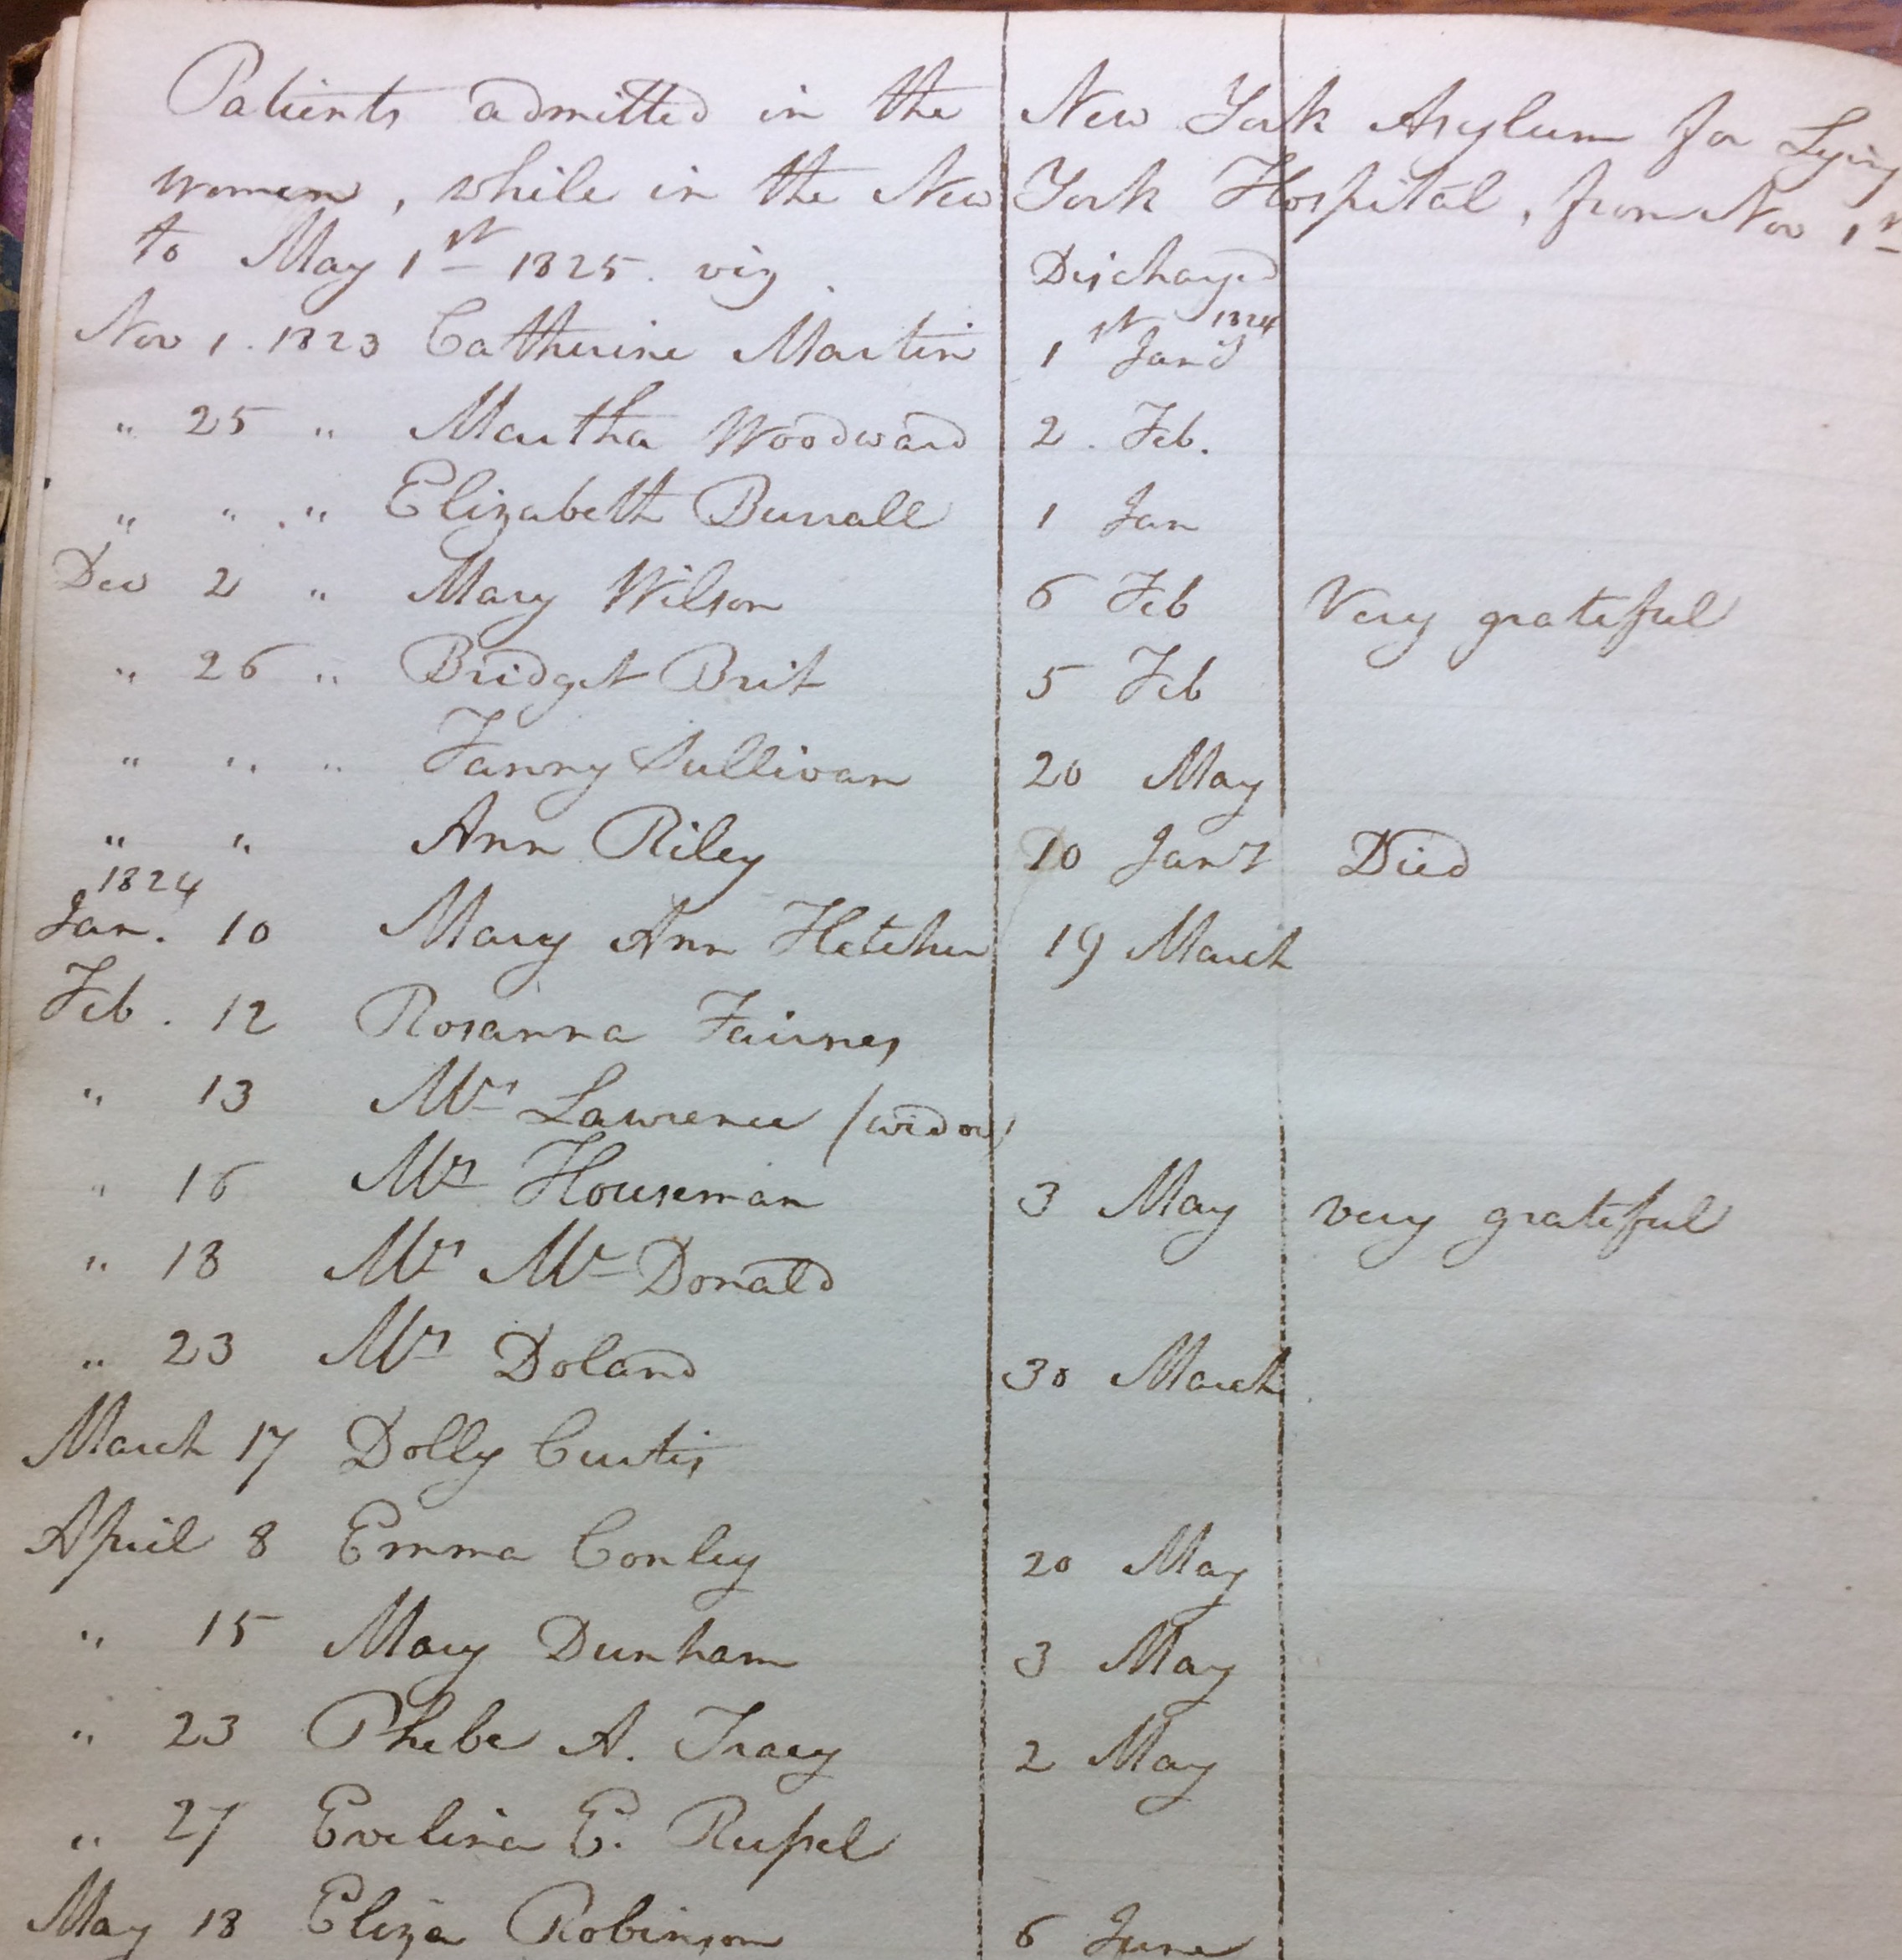 Admissions Book, NYALIW, 1823-1825. (NYHS Manuscript Collection).